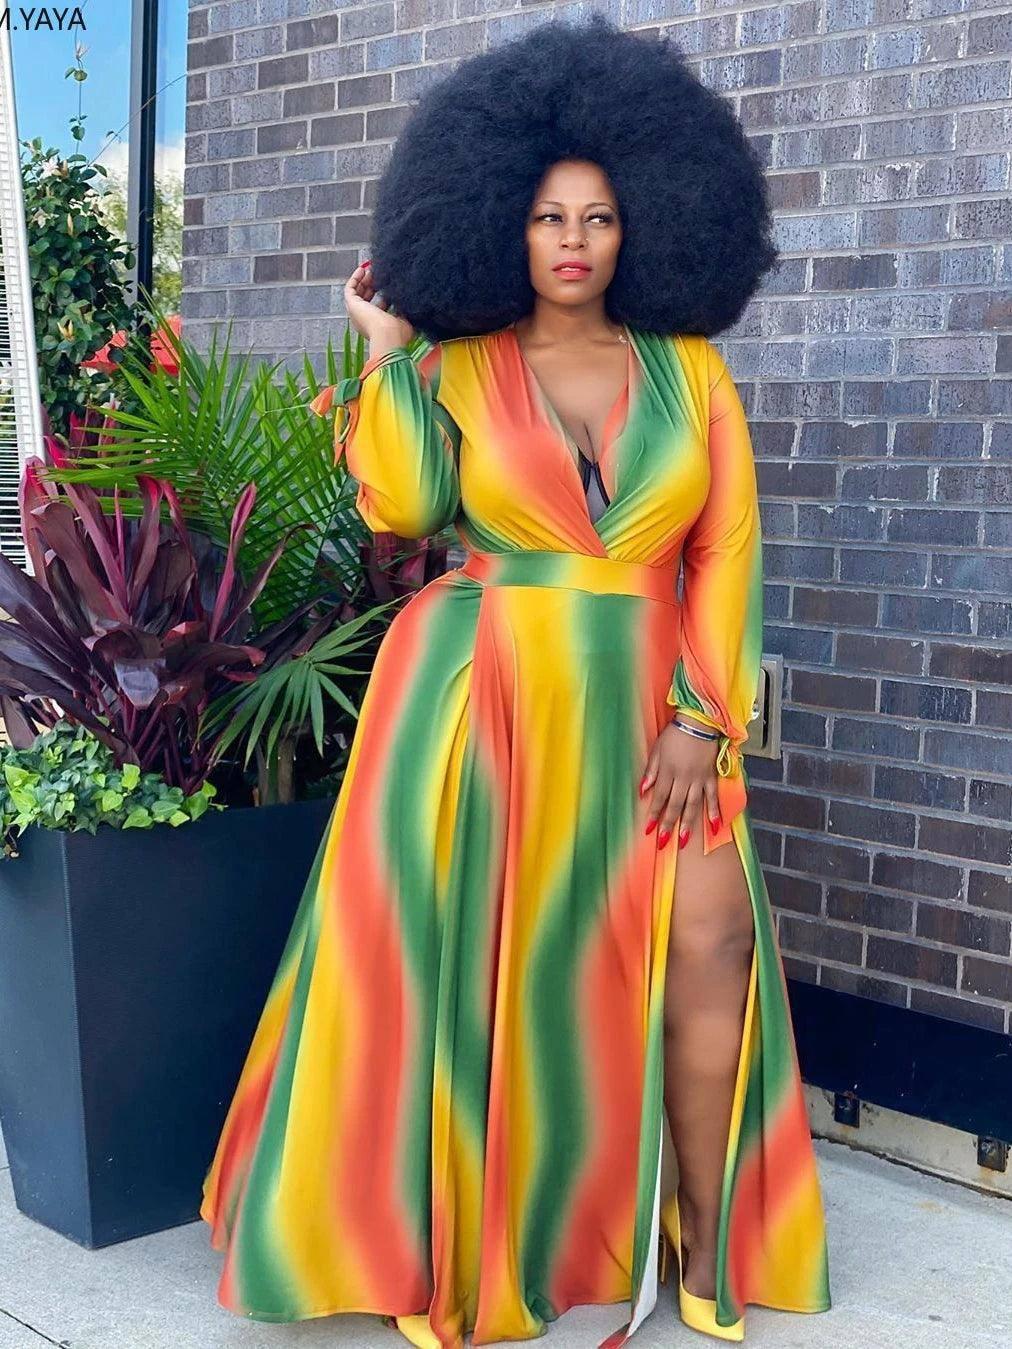 Bold Afro Hairstyles & Vibrant Maxi Dresses-Red-1